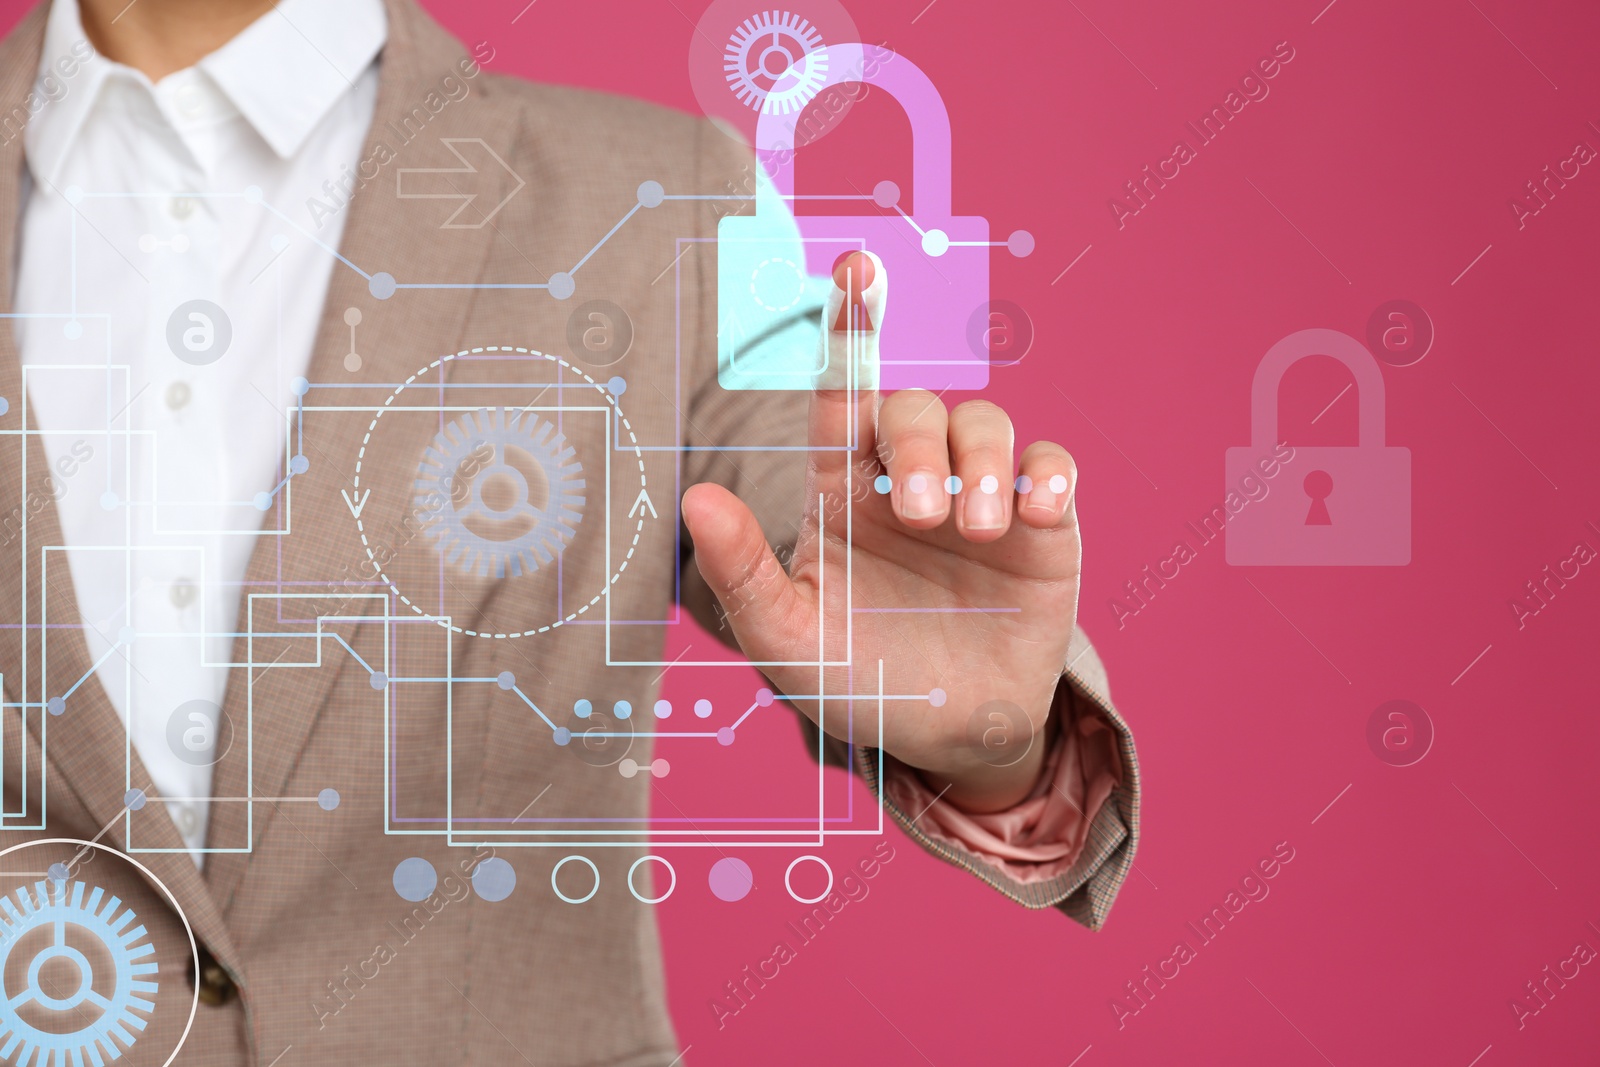 Image of Cyber attack protection. Woman using virtual screen with lock illustration and scheme, closeup